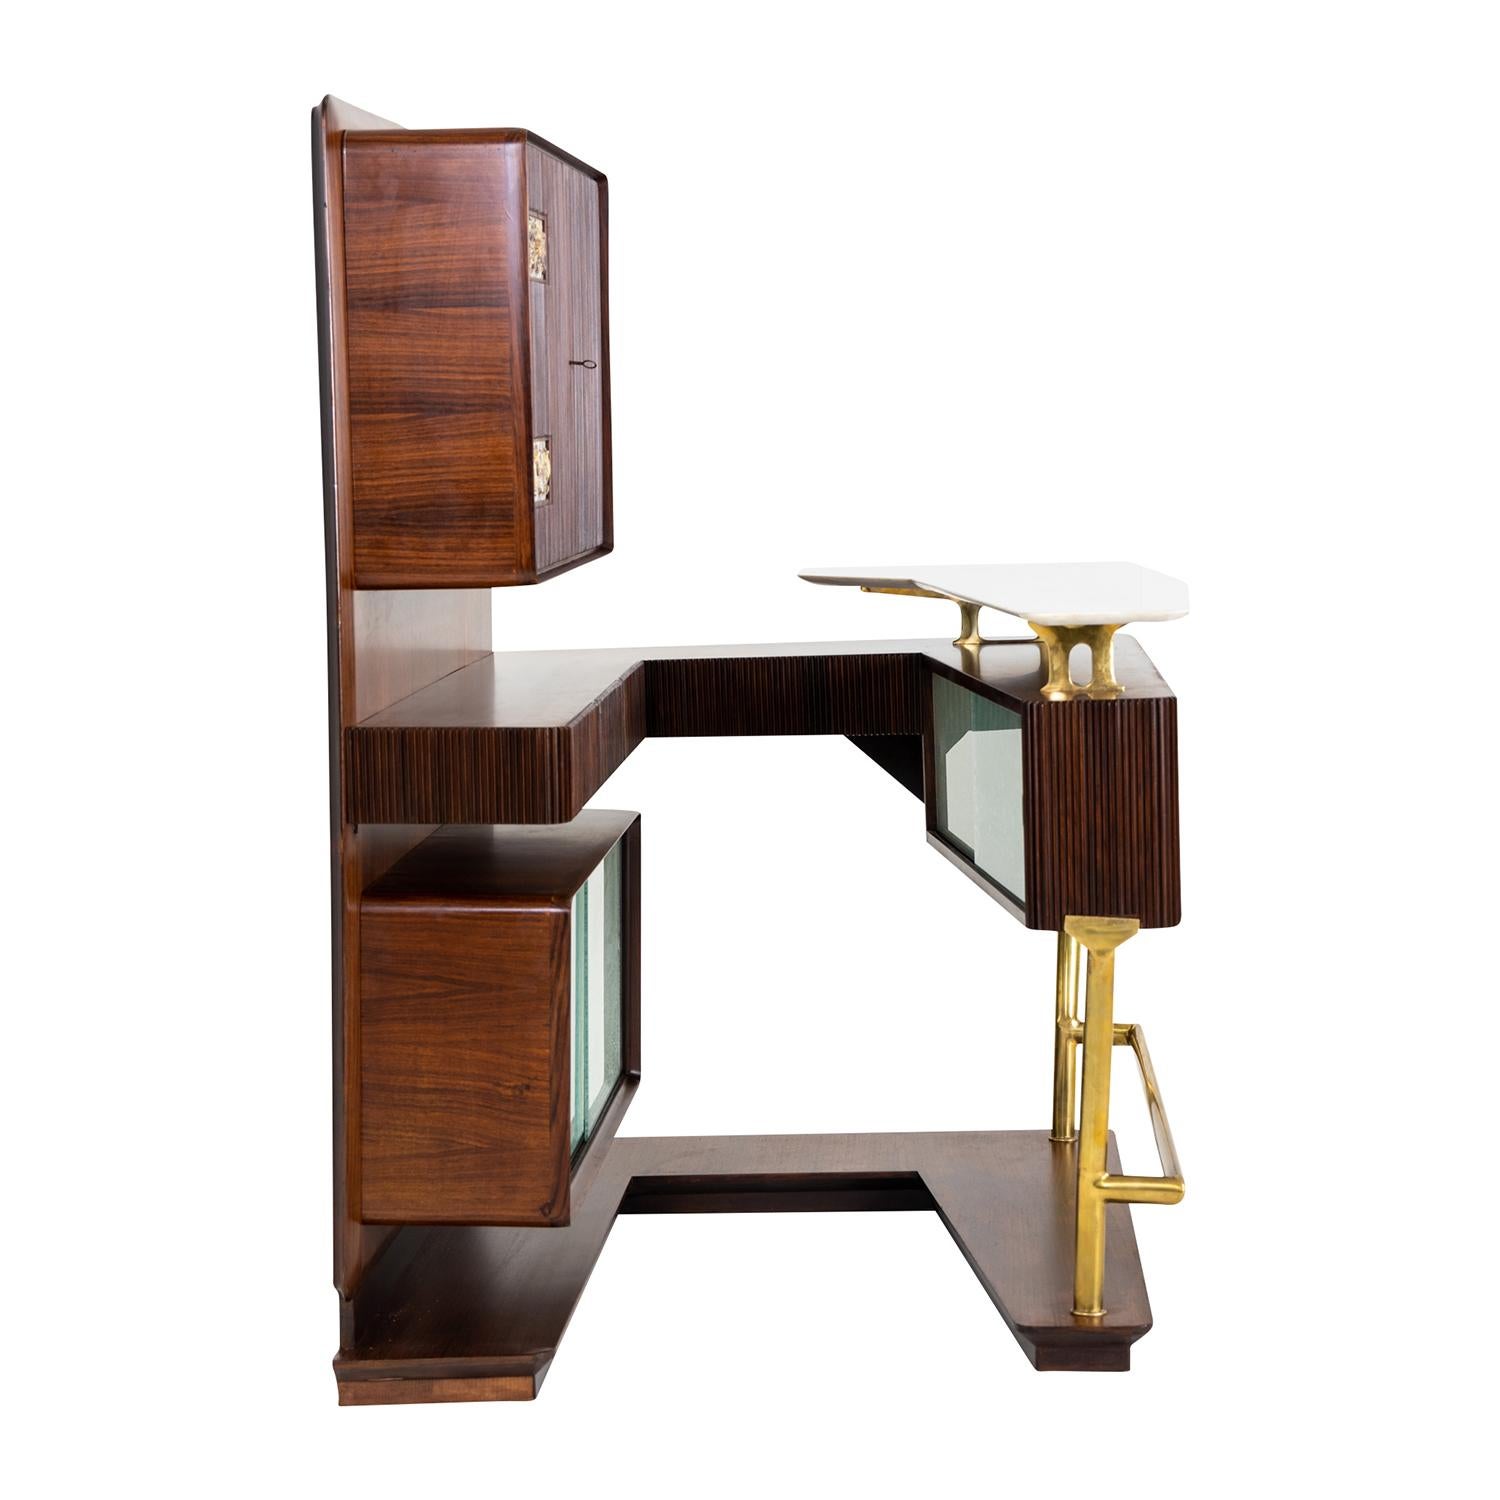 20th Century Italian Large Mahogany Cocktail Bar Attributed to Osvaldo Borsani In Good Condition For Sale In West Palm Beach, FL